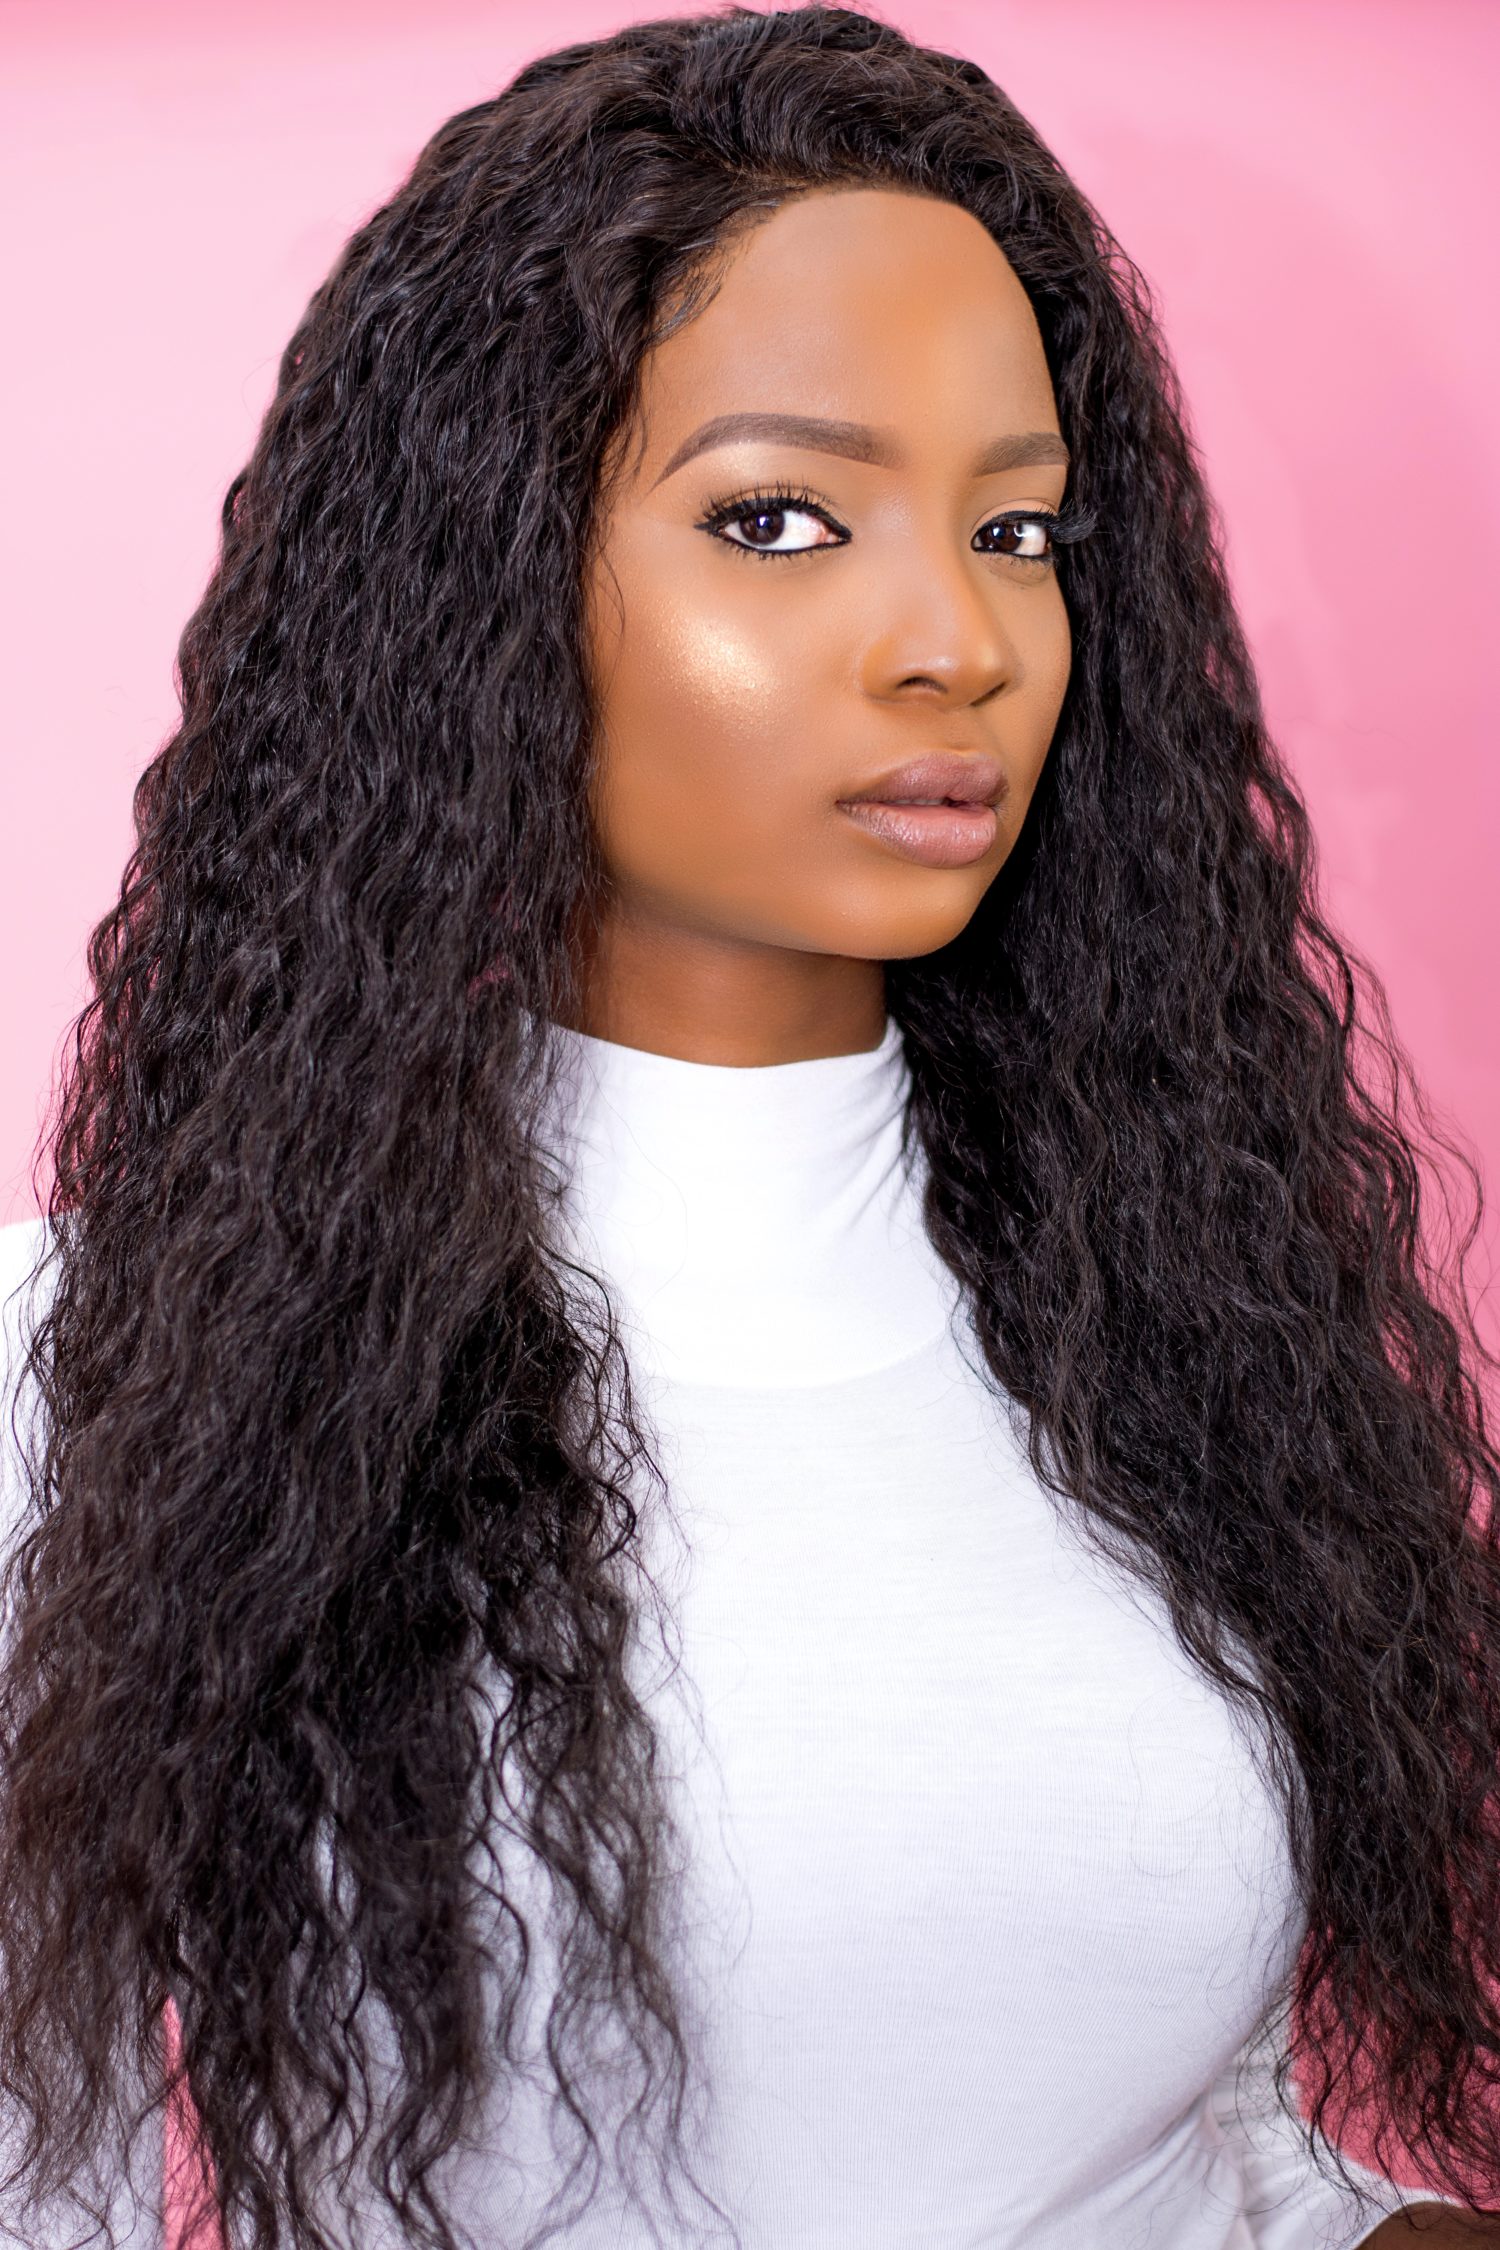 Anne Elise Real Hair’s New Lookbook Is Titled ‘A Pink Christmas’ and the Photos Are Stunning